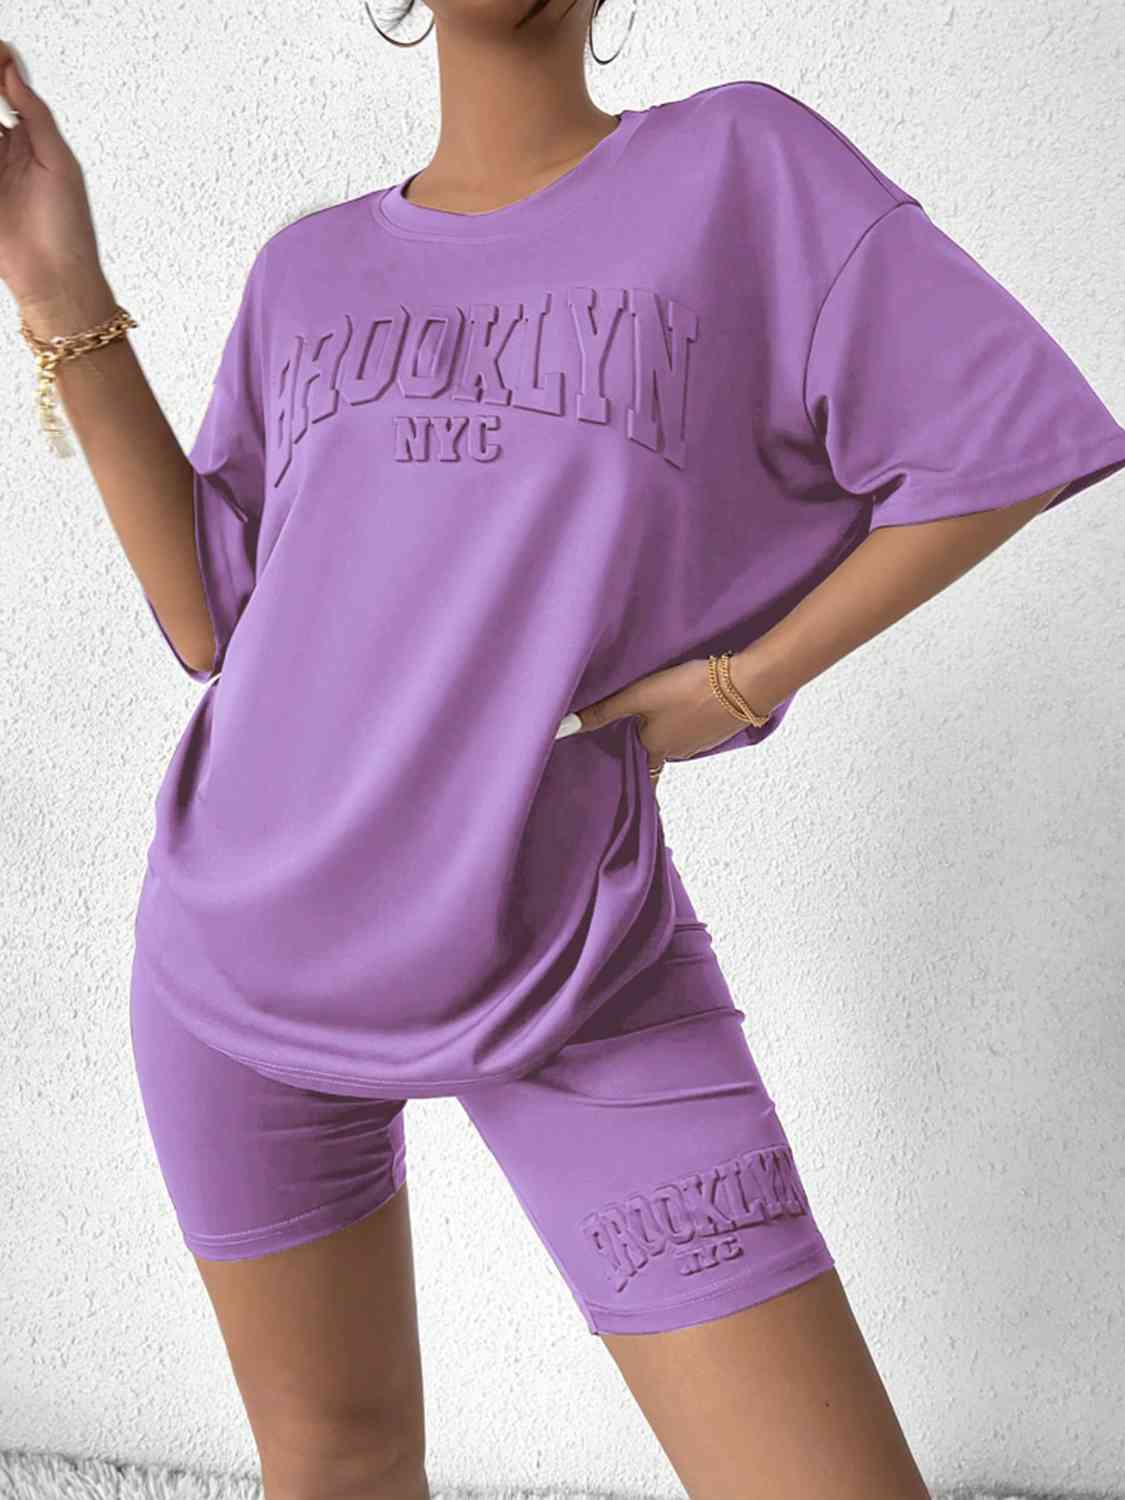 Thistle BROOKLYN NYC Graphic Top and Shorts Set Sentient Beauty Fashions Apparel &amp; Accessories